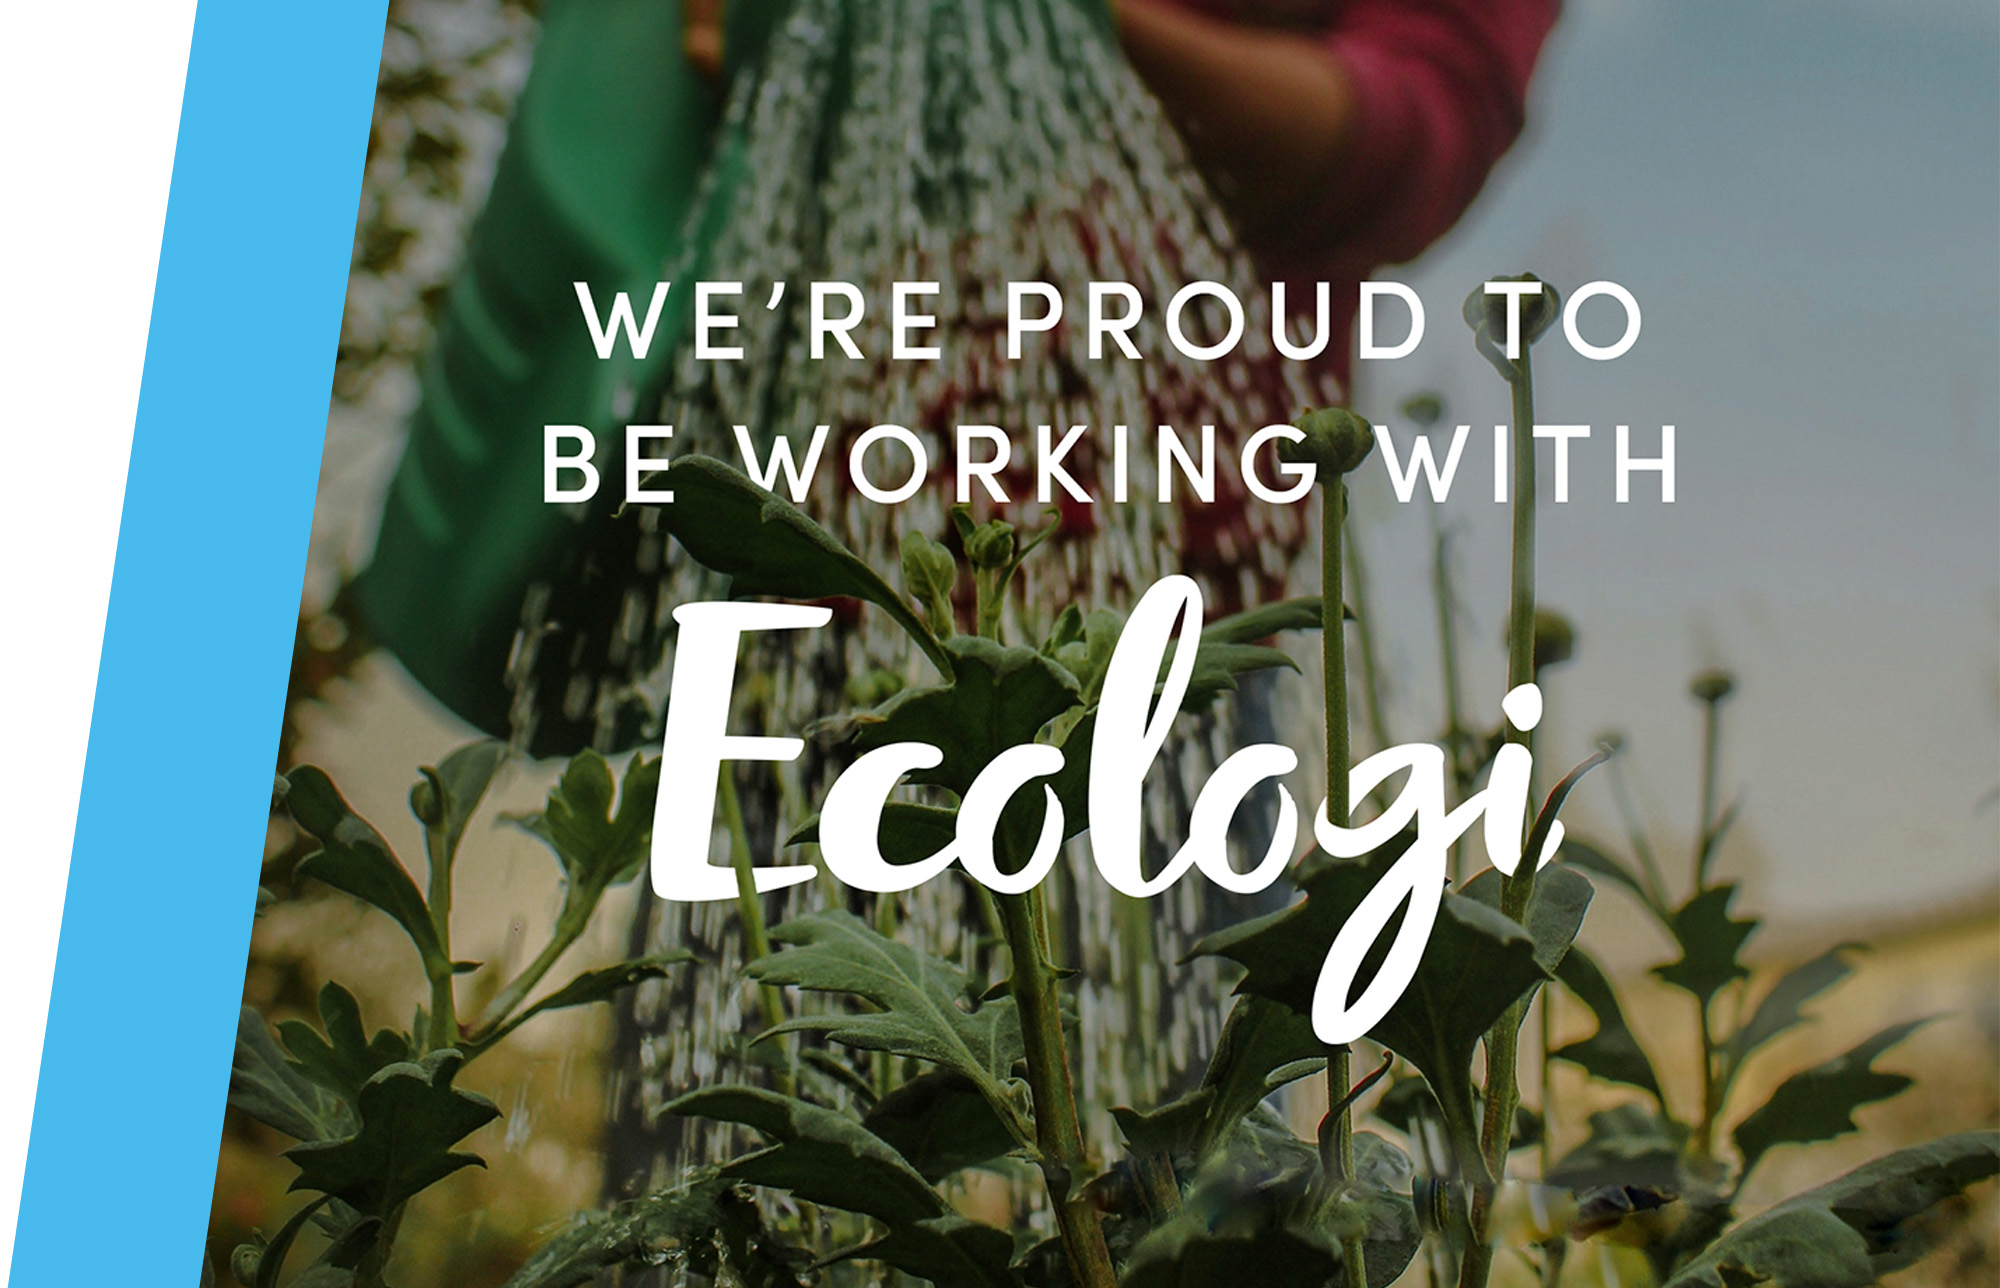 We're proud to be working with Ecologi